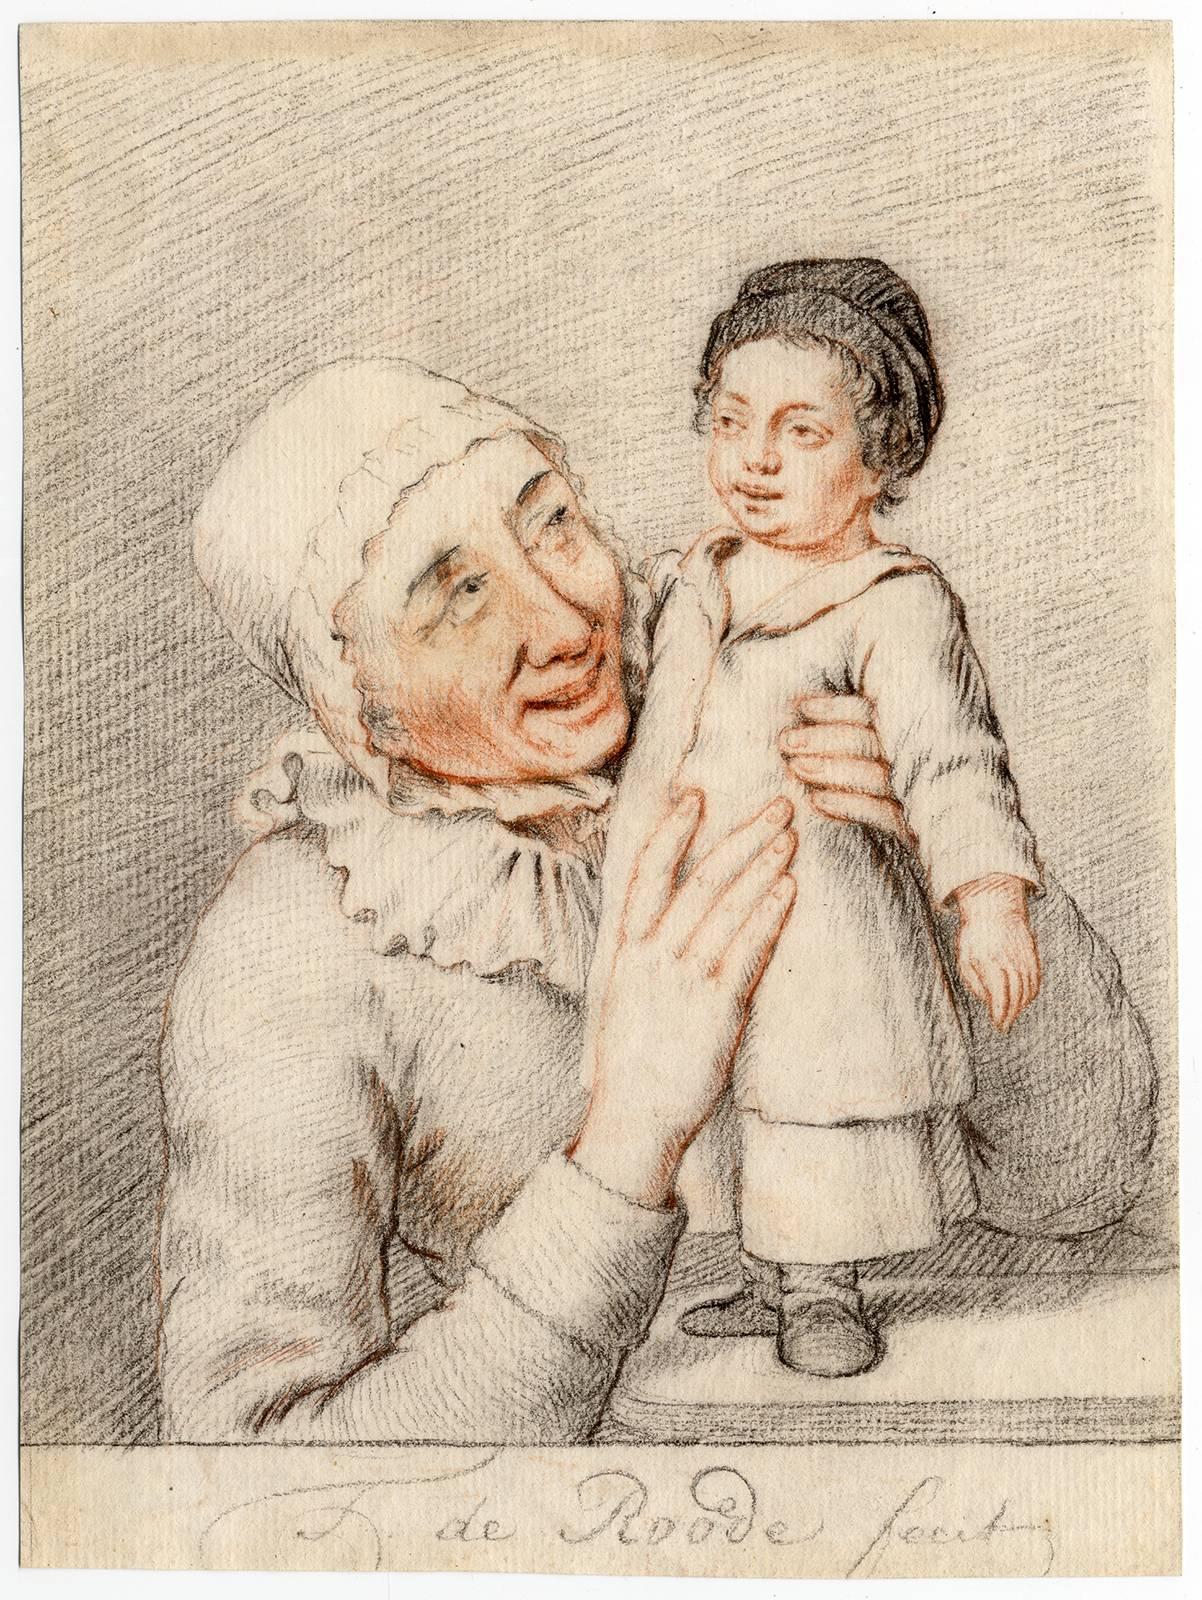 Theodorus de Roode Figurative Art – Untitled - Grandmother smiling at a (grand)child.